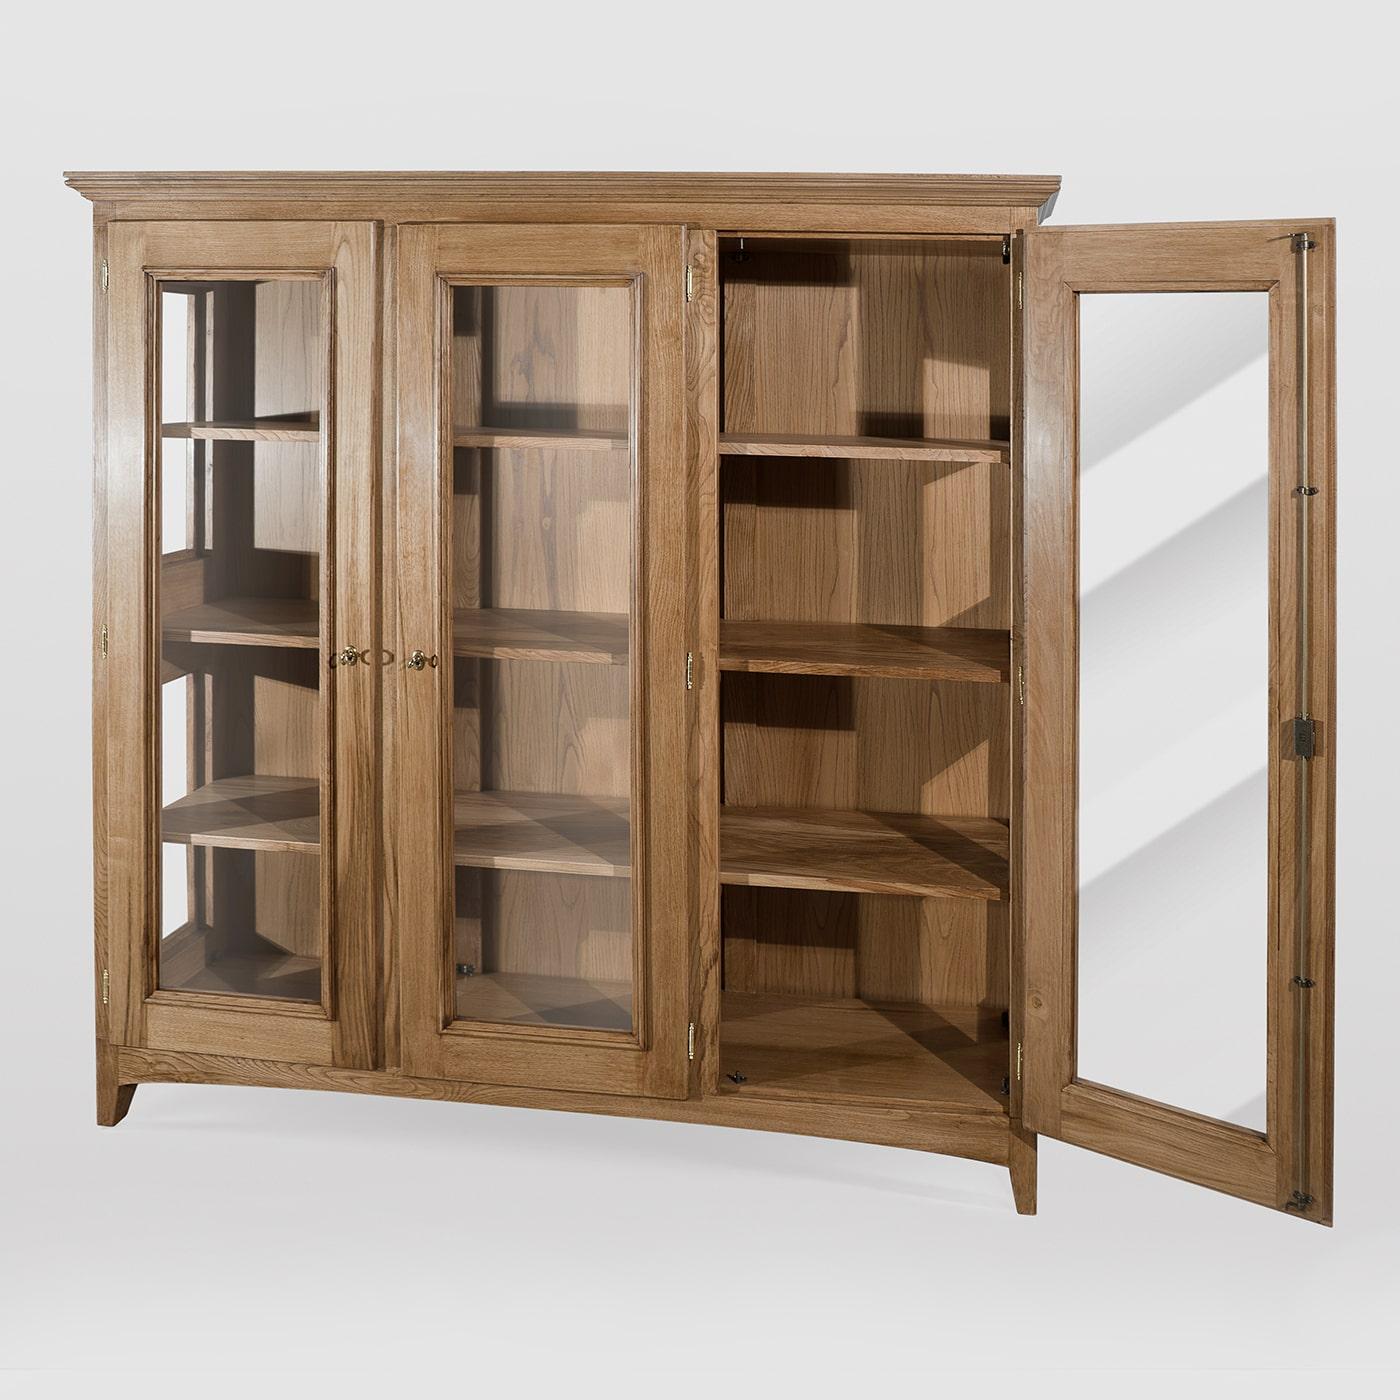 This gorgeous bookcase will imbue any decor style with utmost refinement and a timeless allure. Boasting three glass doors and three wooden shelves, it is entirely handcrafted of chestnut wood. Showcasing precious and sturdy frames, it is lacquered